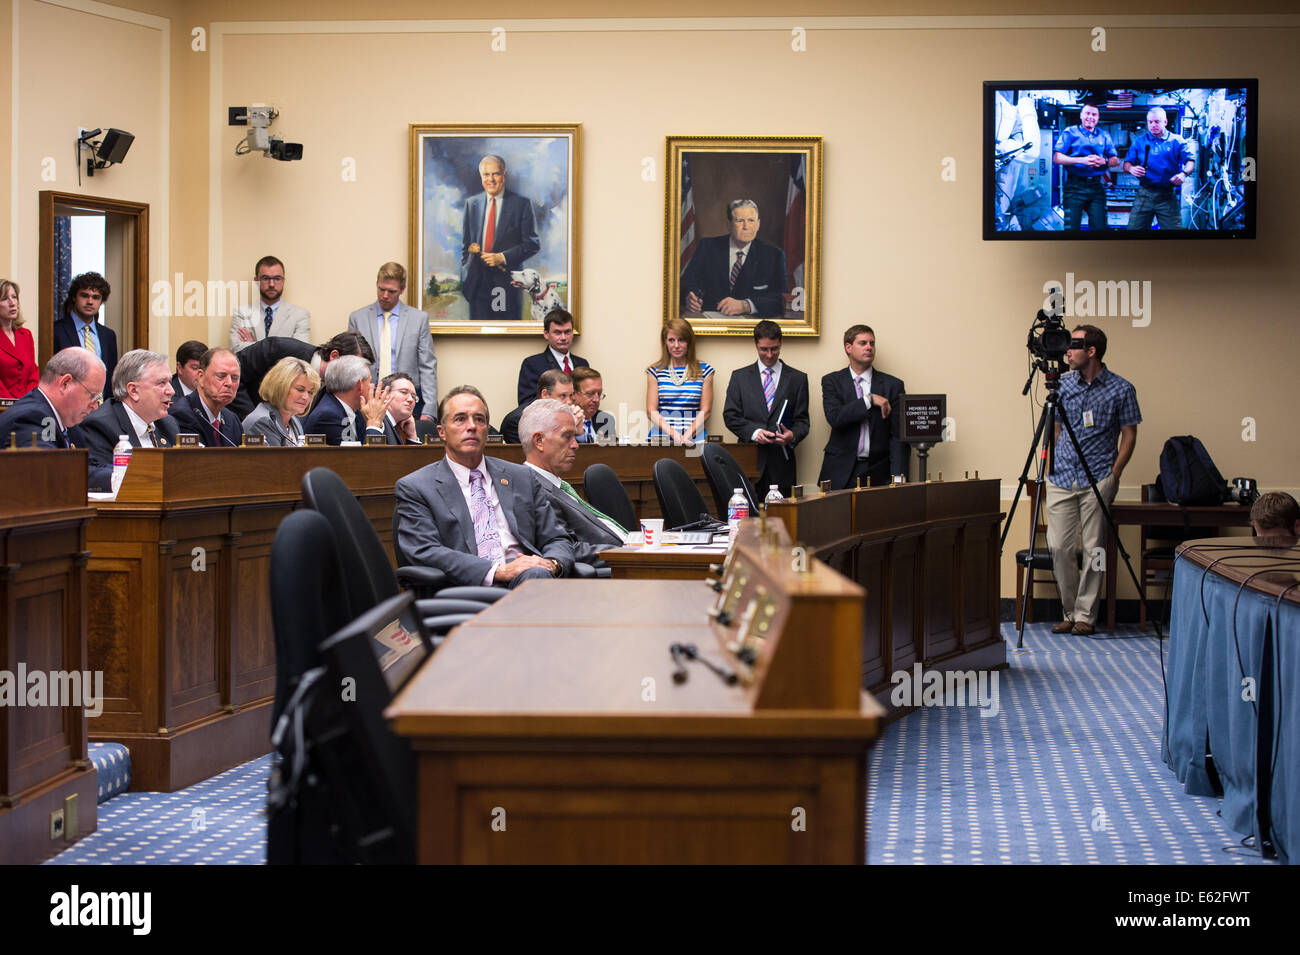 Representative Steve Stockman (R-TX) asks astronauts Steve Swanson and Reid Wisemen a question at the live downlink with the International Space Station (ISS) Thursday, July 24, 2014 at the Rayburn House Office Building in Washington, DC. The event provid Stock Photo